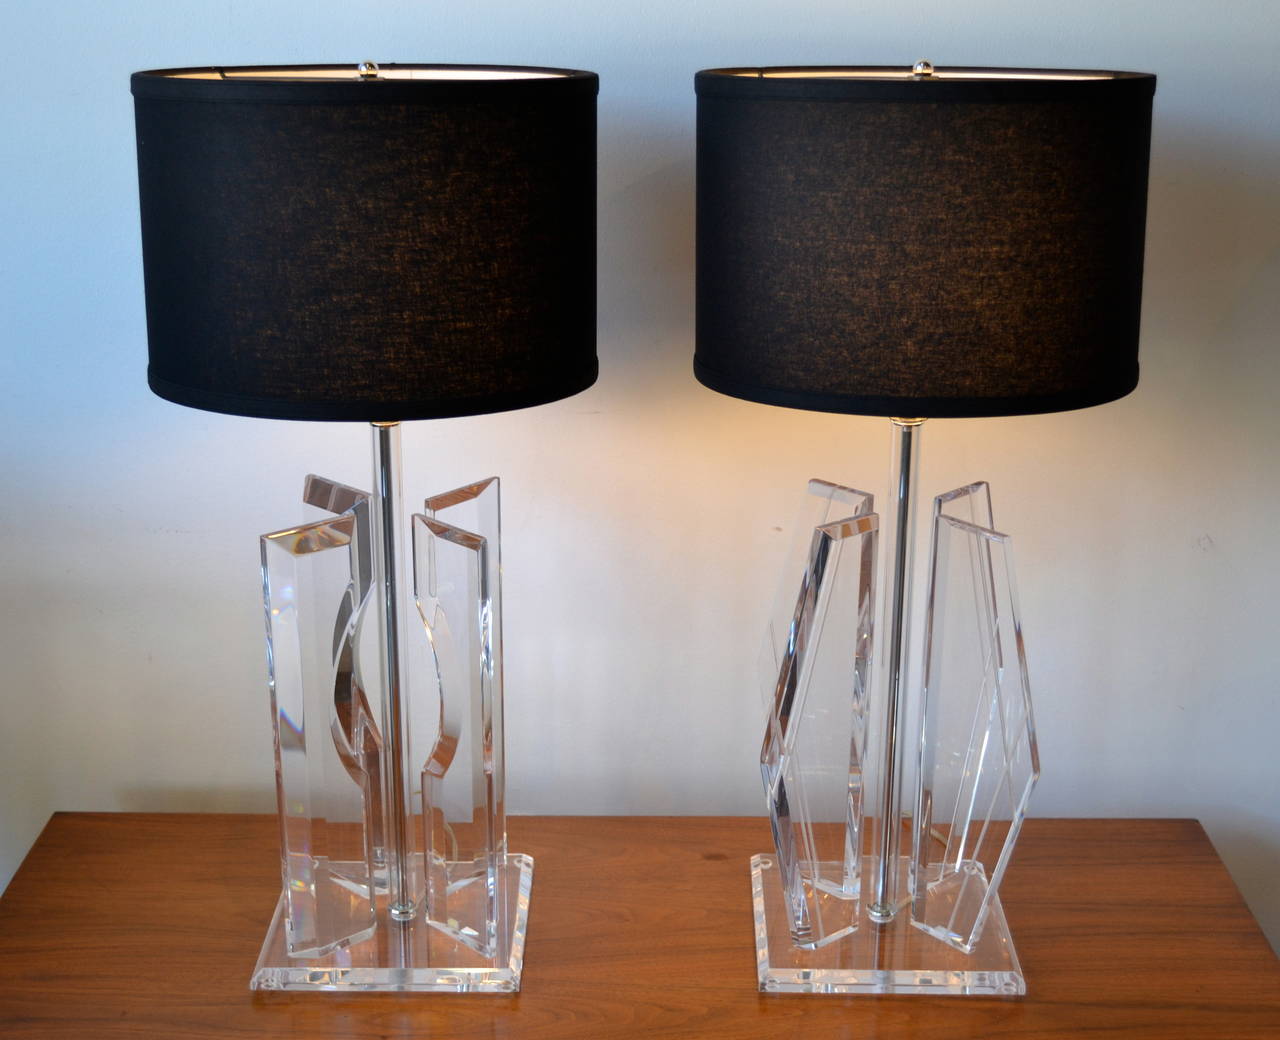 Outstanding large Mid-Century Modern sculptural lucite and chrome table lamps.  Each with unique shape, 1 inch thick lucite panels.